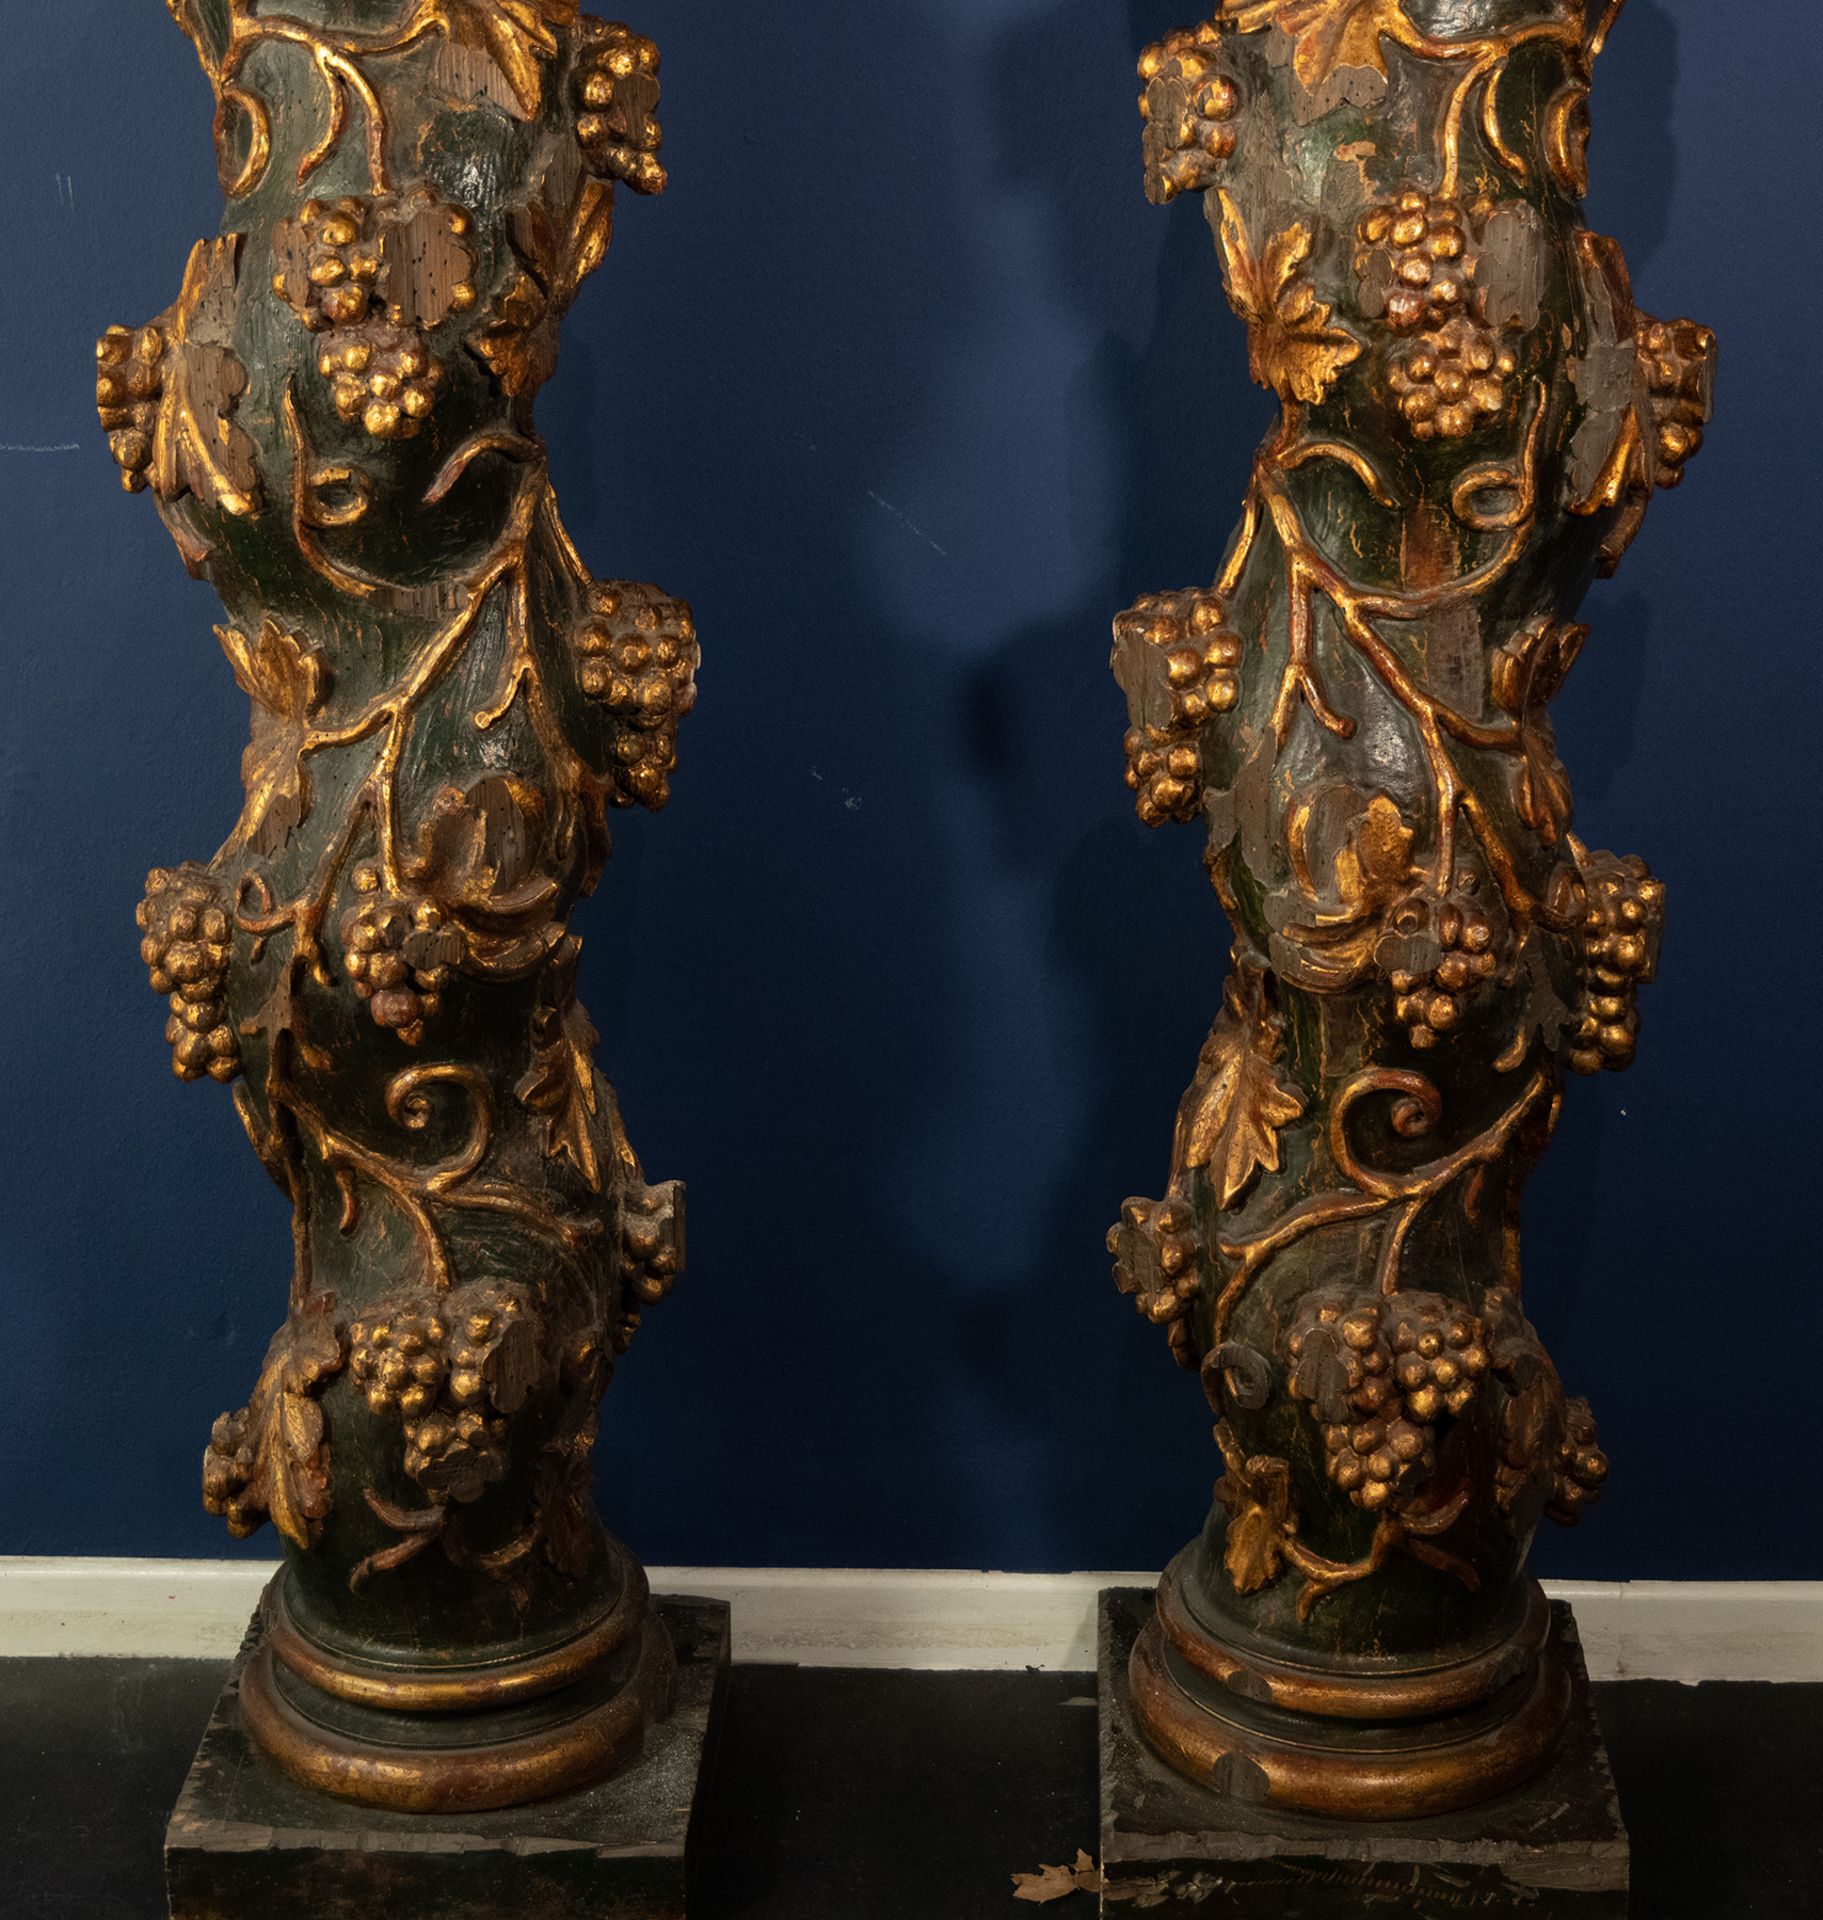 Pair of Large Solomonic Columns, 17th century, in carved, polychromed and gilt wood - Image 4 of 4